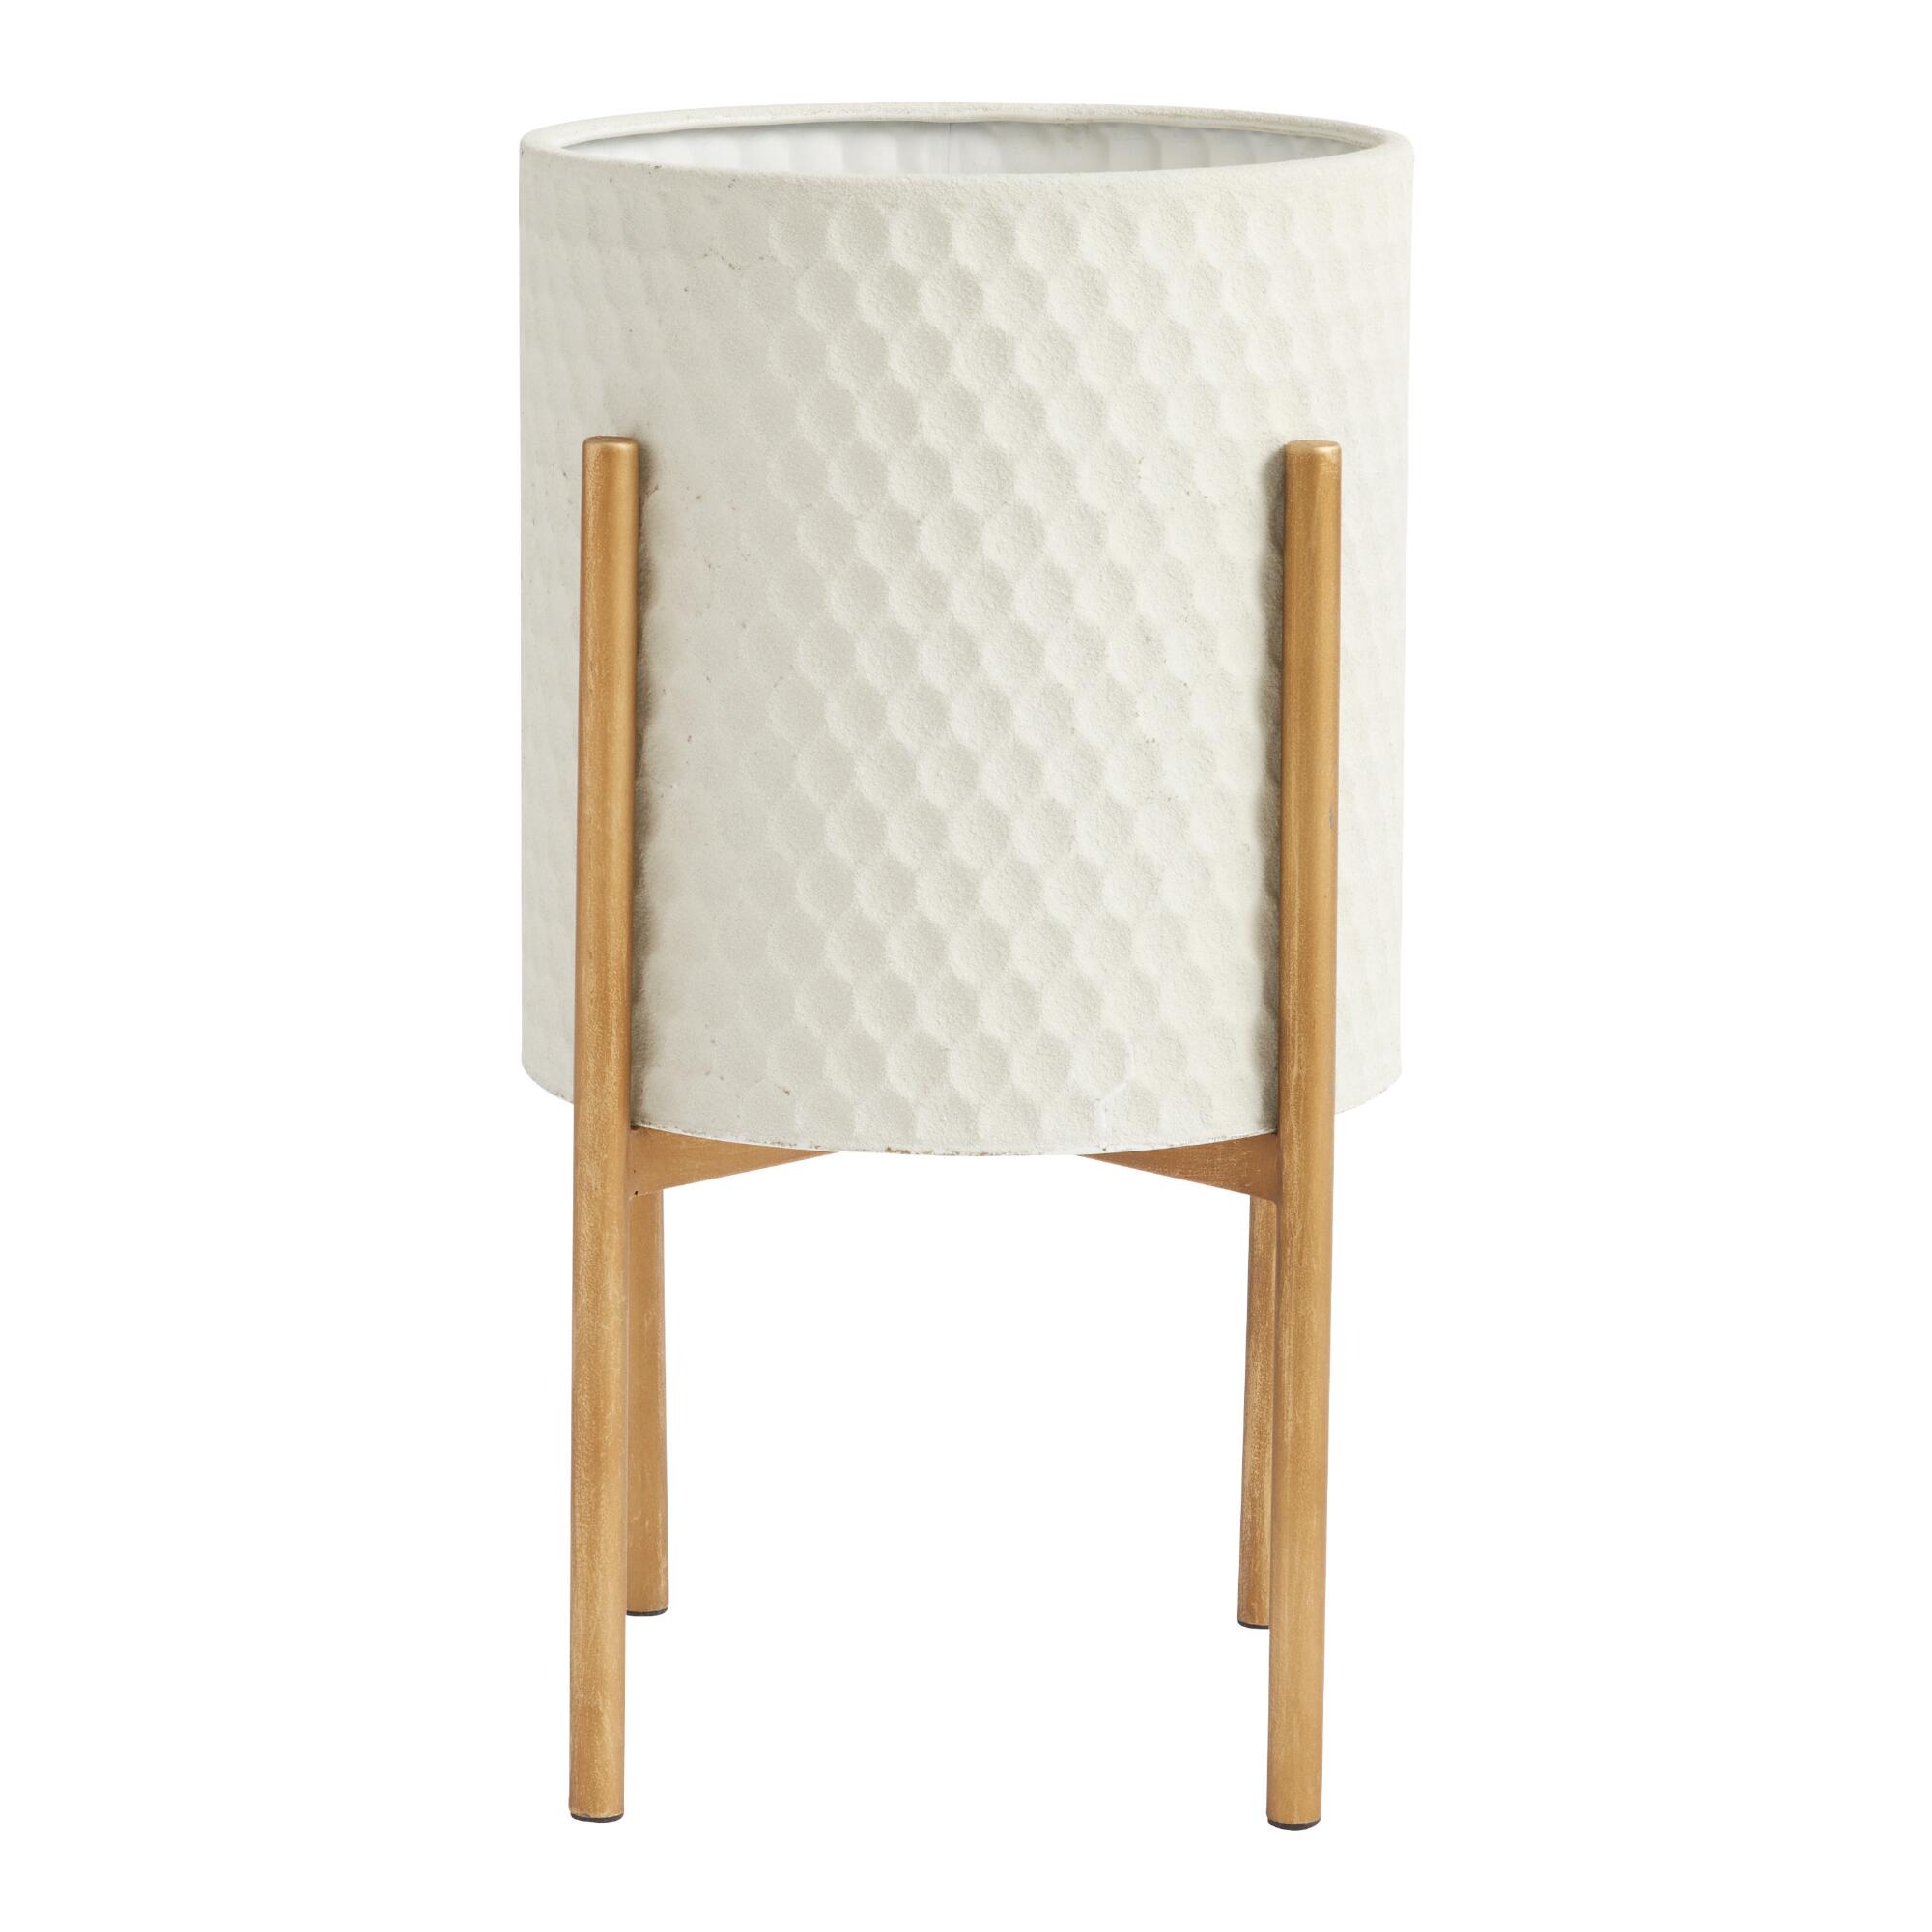 White Textured Honeycomb Planter With Gold Stand: White/Gold - Metal by World Market